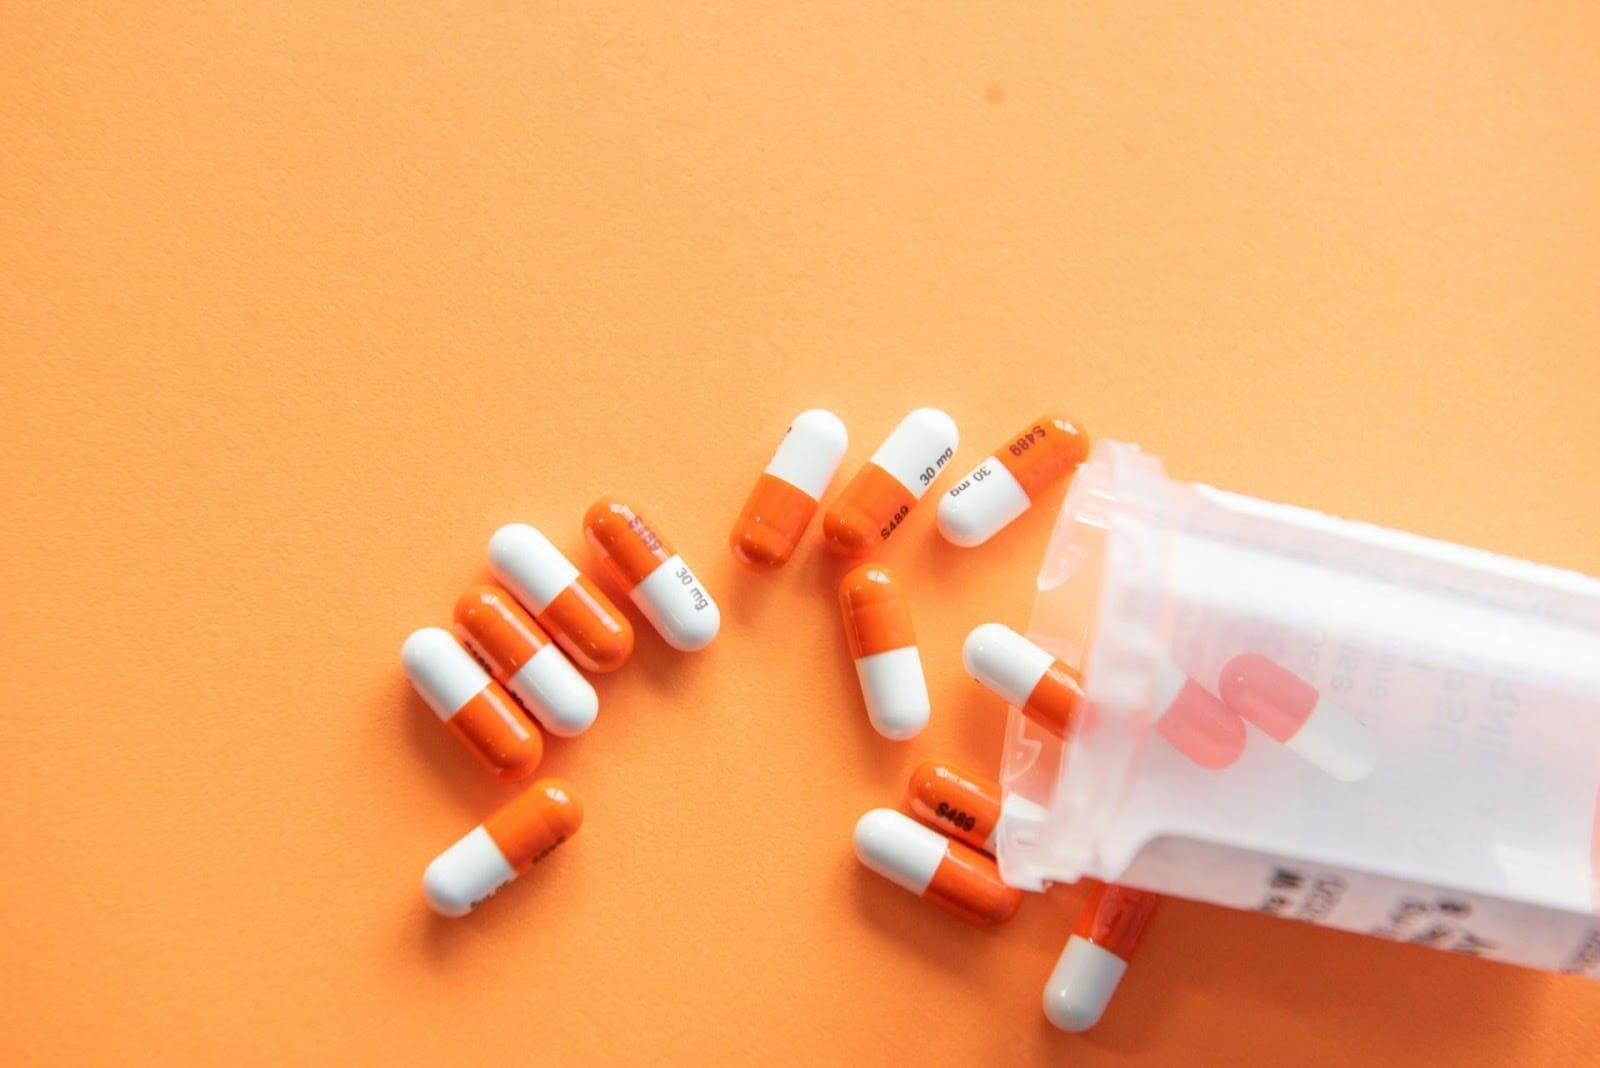 A Bottle Of Orange And White Capsules Spilled Out On An Orange Background